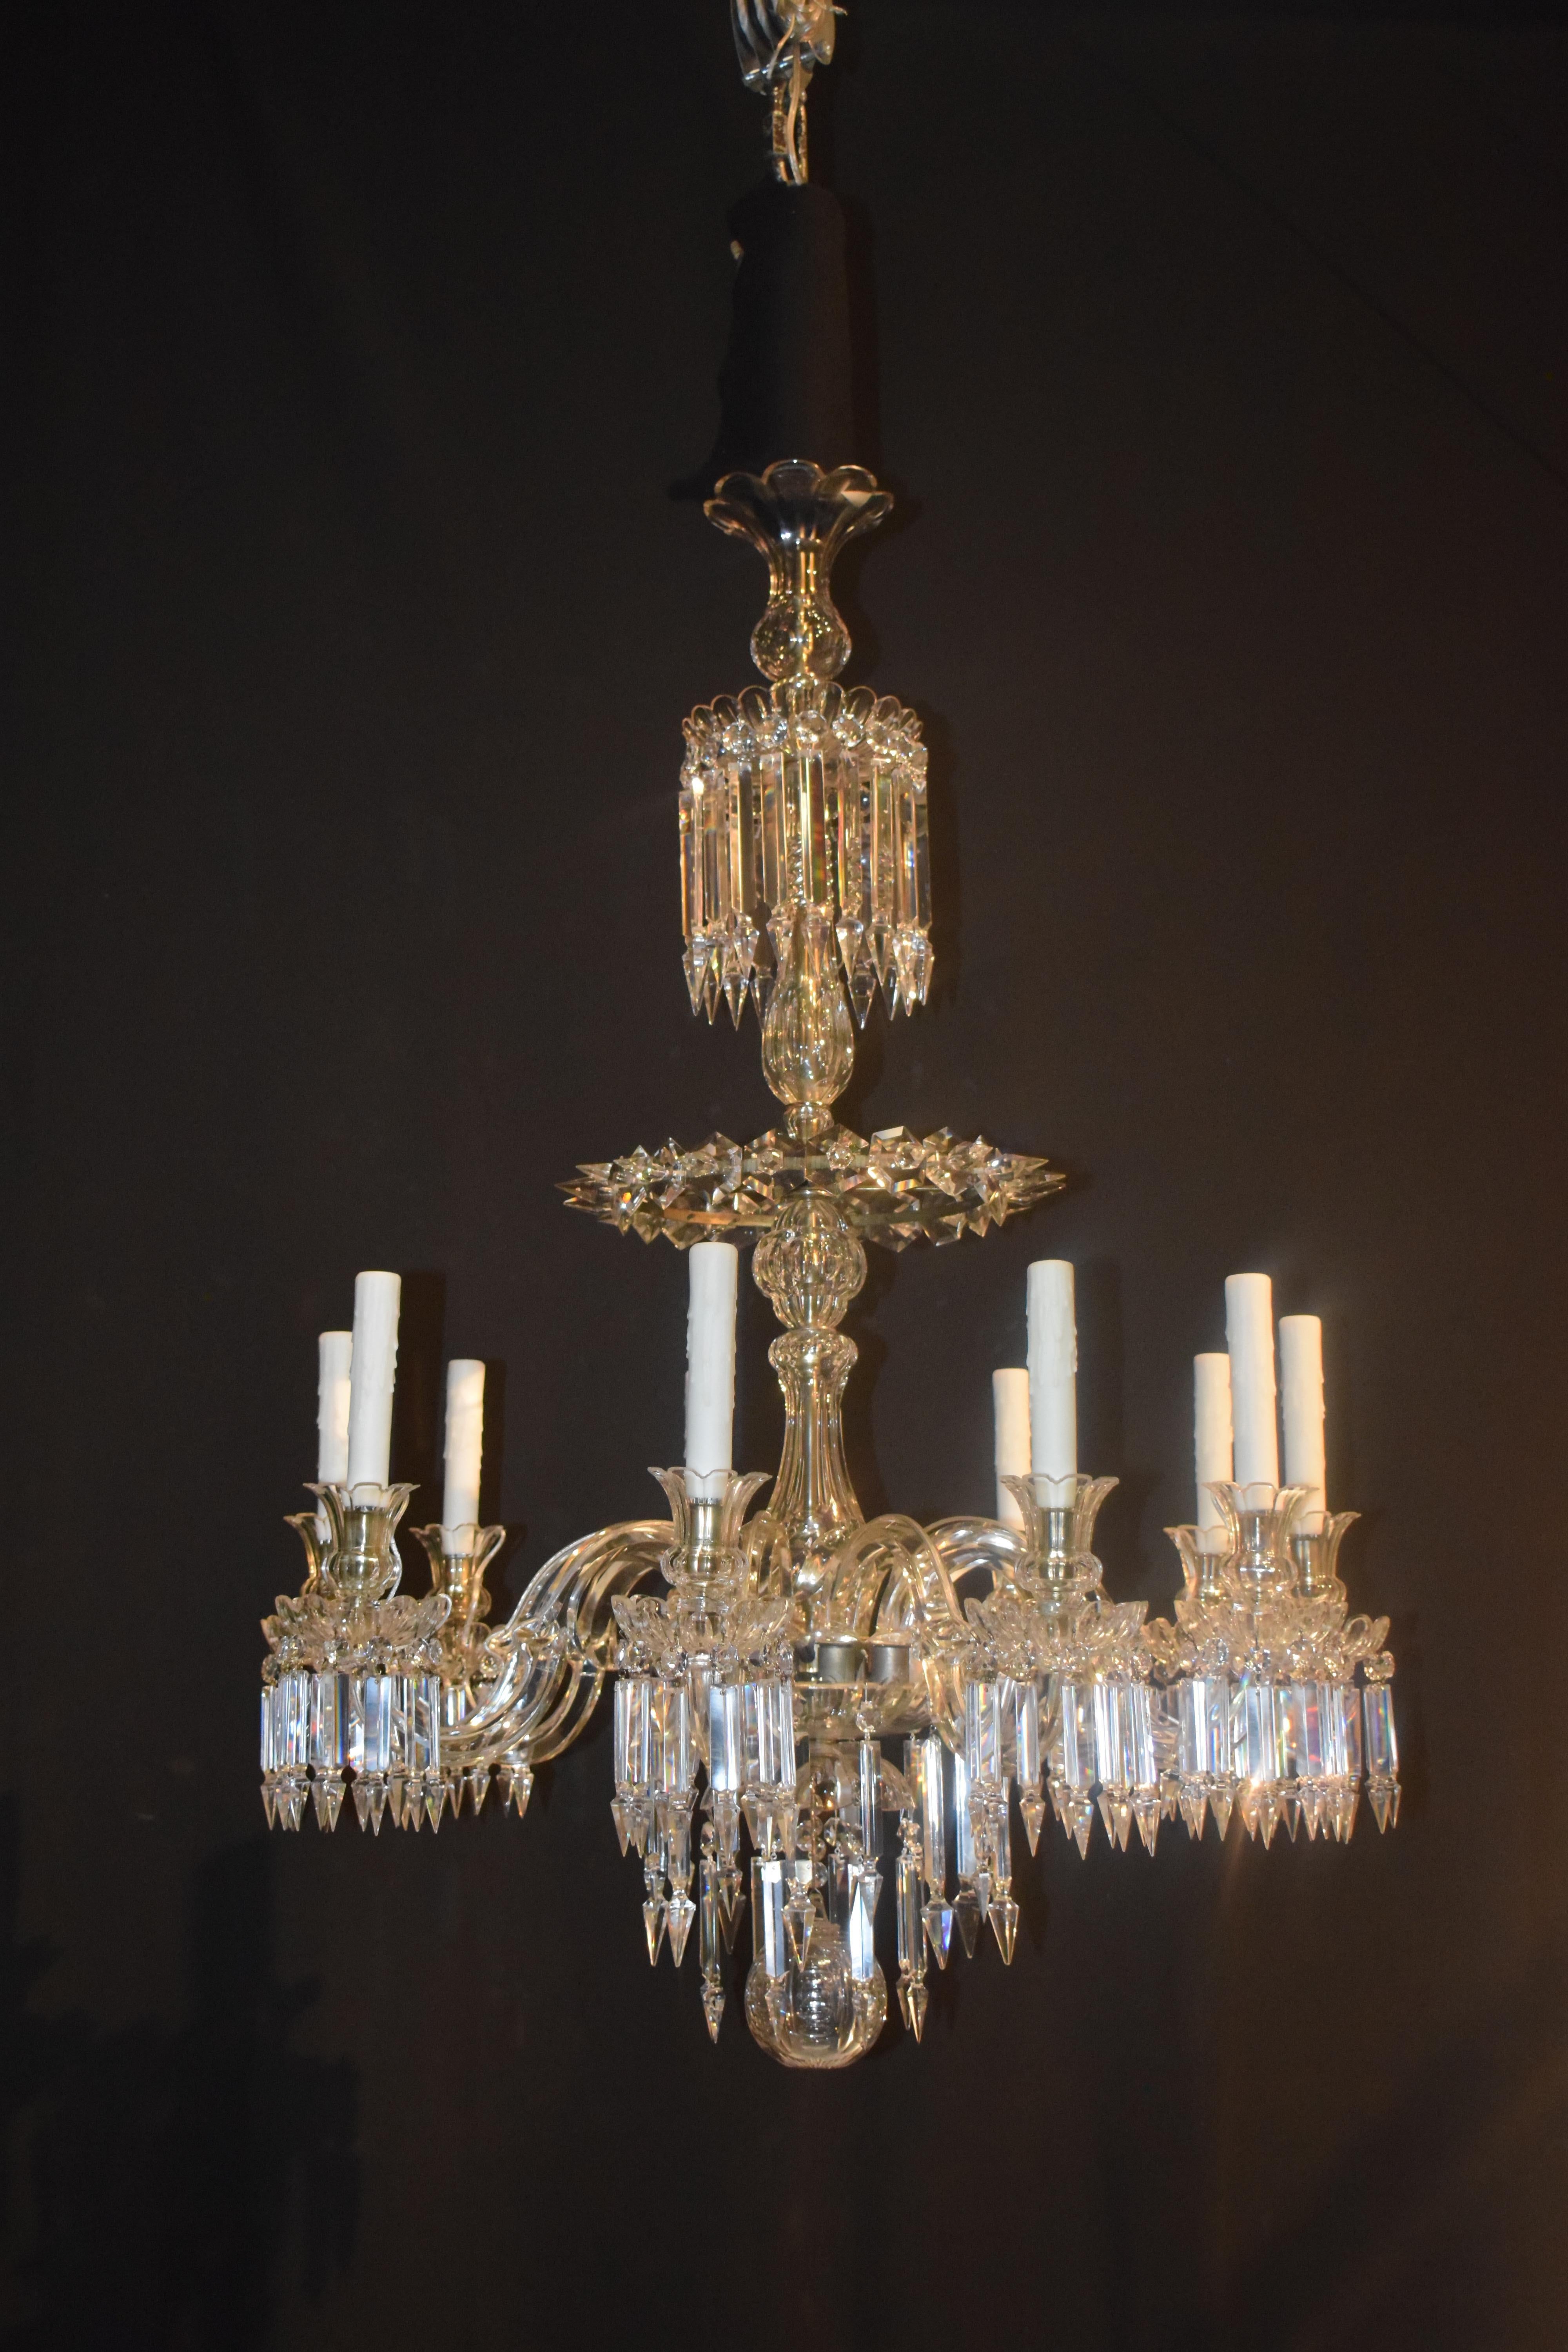 An Magnificent English Crystal Chandelier, originally for candles (now electrified). Exceptional Quality. 10 lights. France, circa 1860. 
Dimensions: Height 48